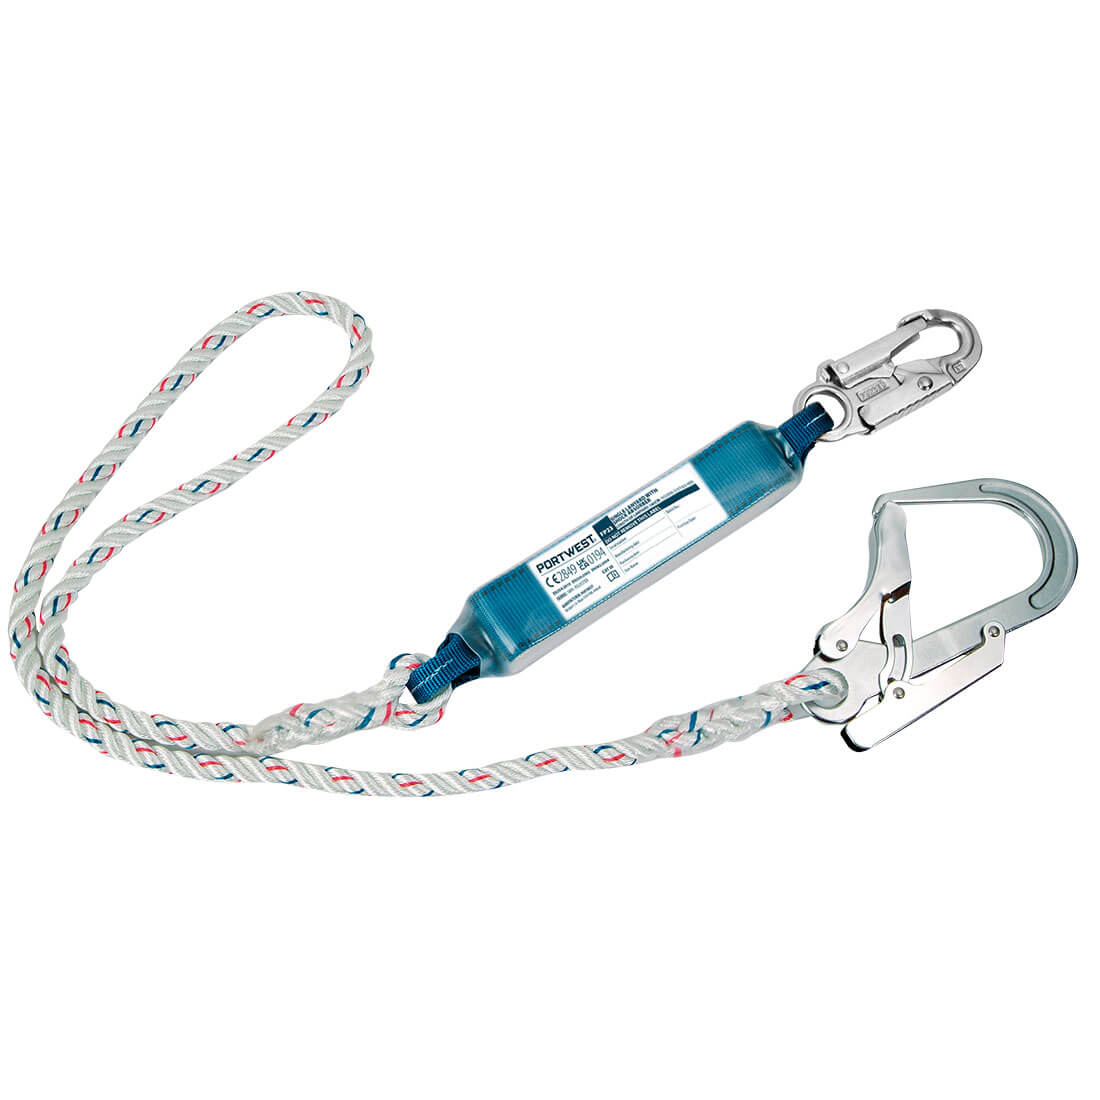 Portwest Single 1.8m Lanyard With Shock Absorber